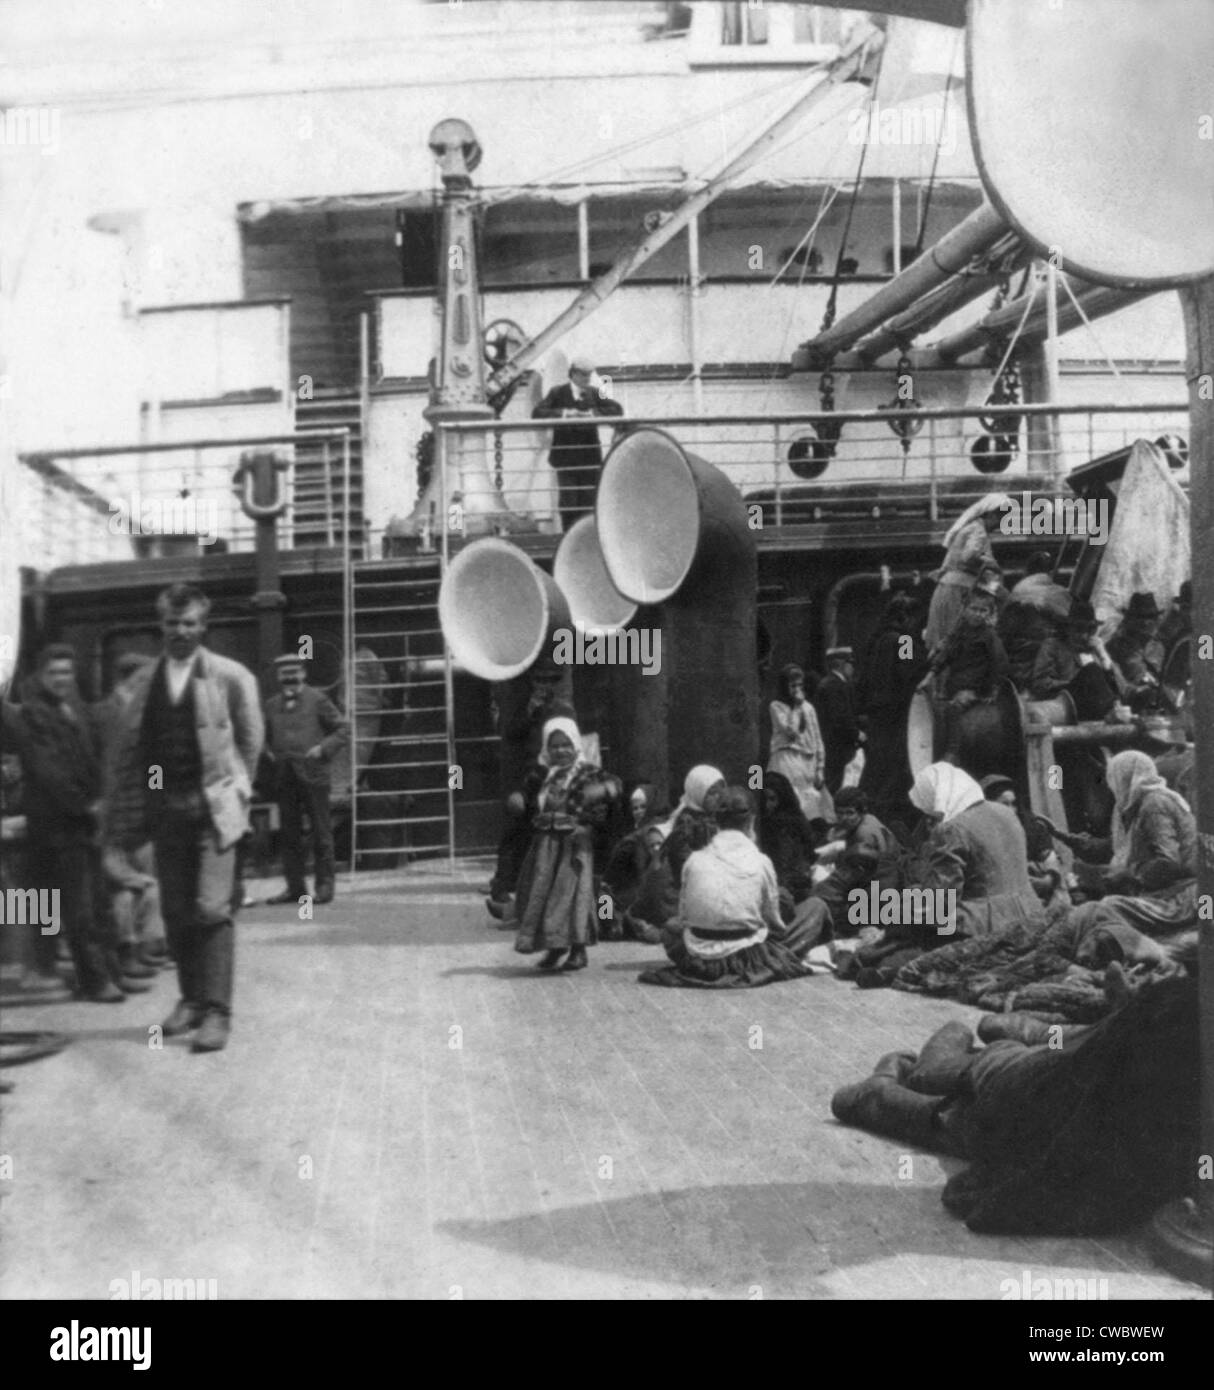 Steerage passengers taking life easy on an ocean liner. Immigrants relax and stroll on the open deck amidst ventilation Stock Photo